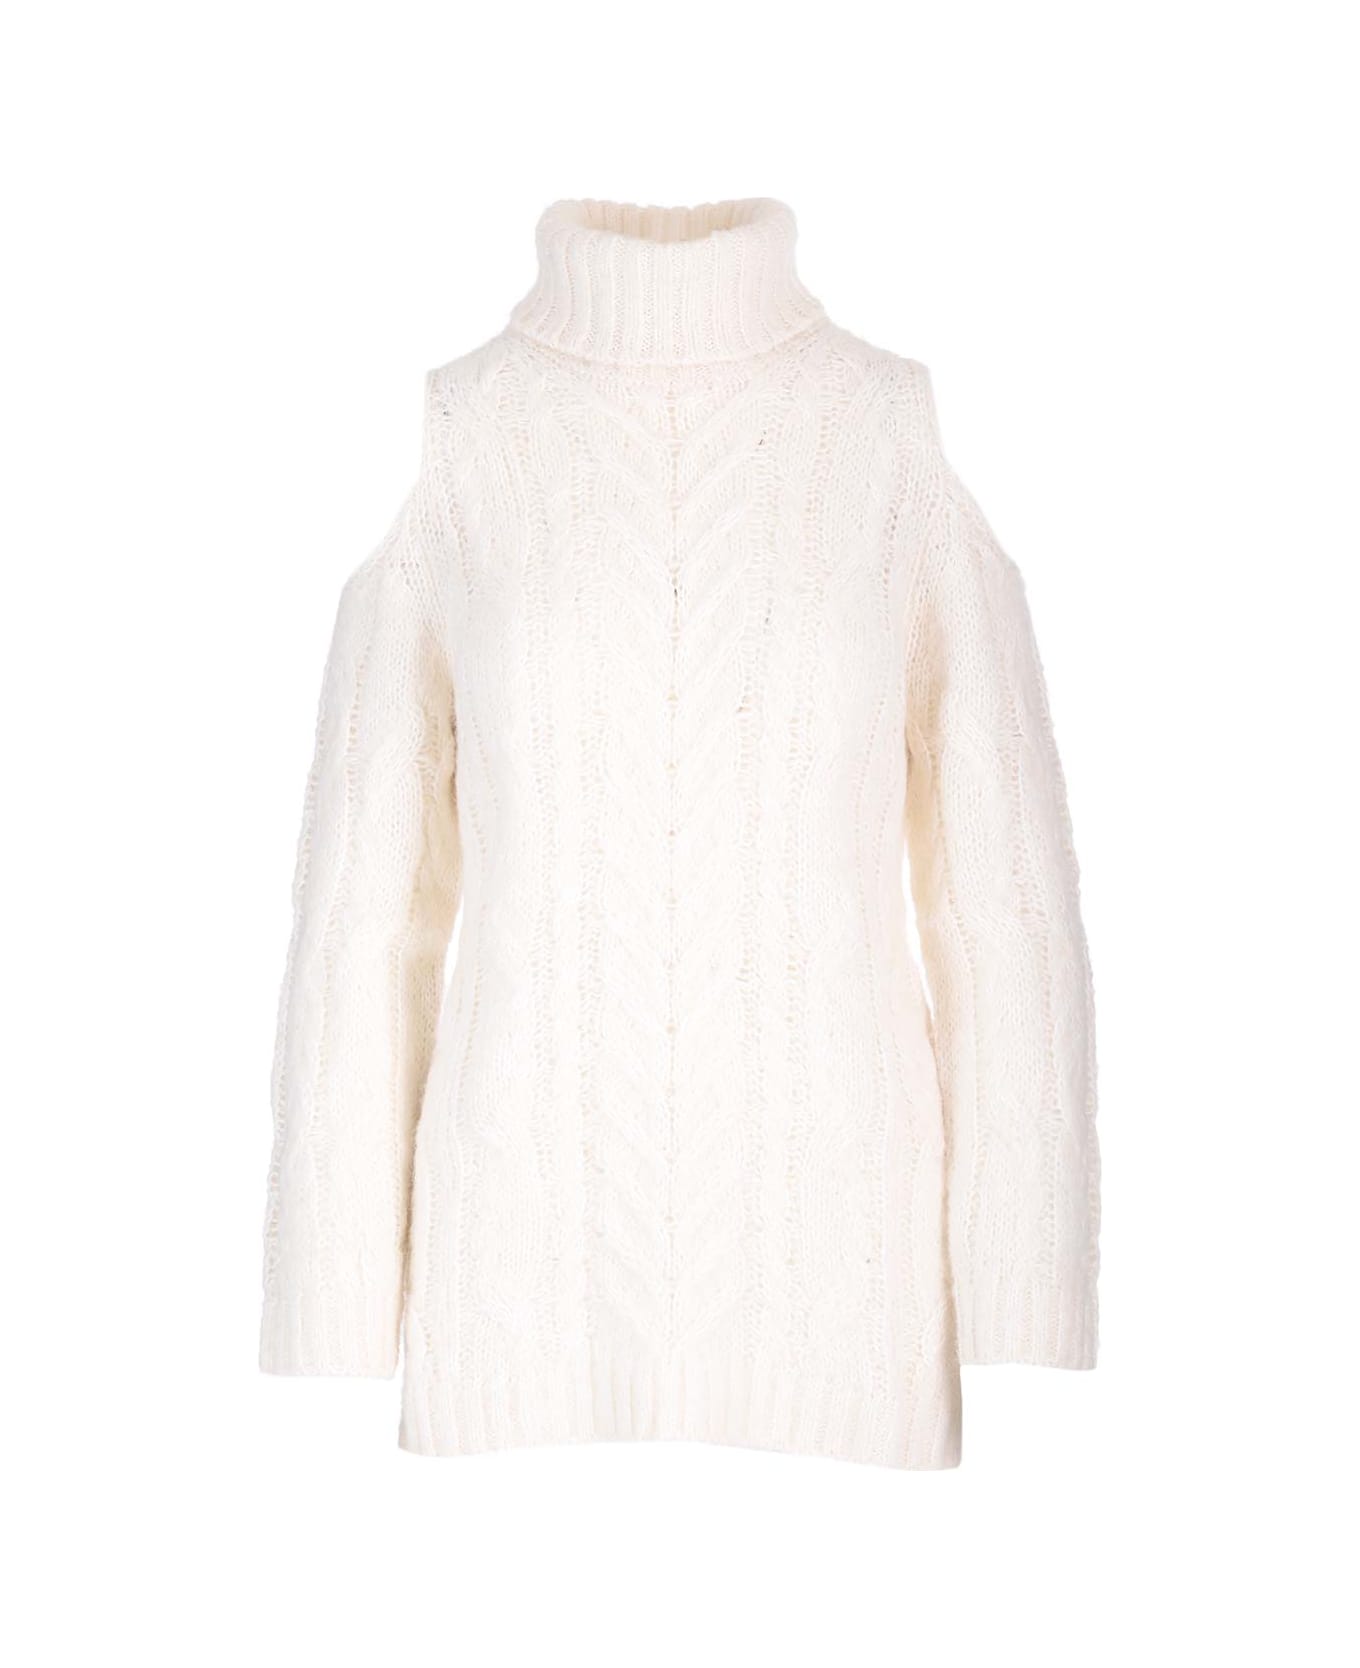 Parosh Oversized Sweater With Bare Shoulders - WHITE